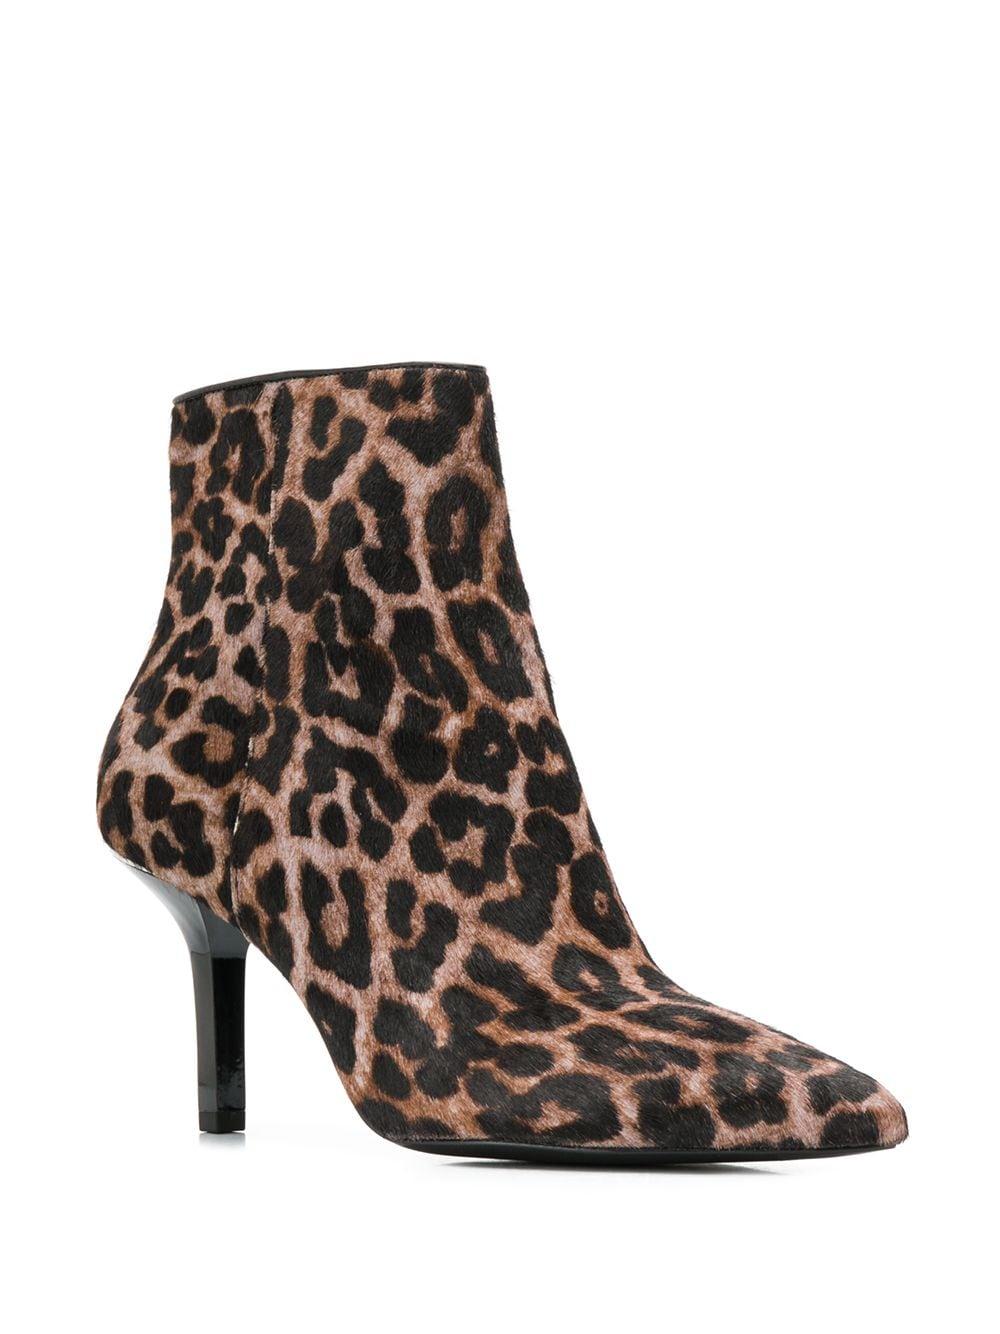 MICHAEL Michael Kors Leather Leopard Print Boots in Brown - Lyst